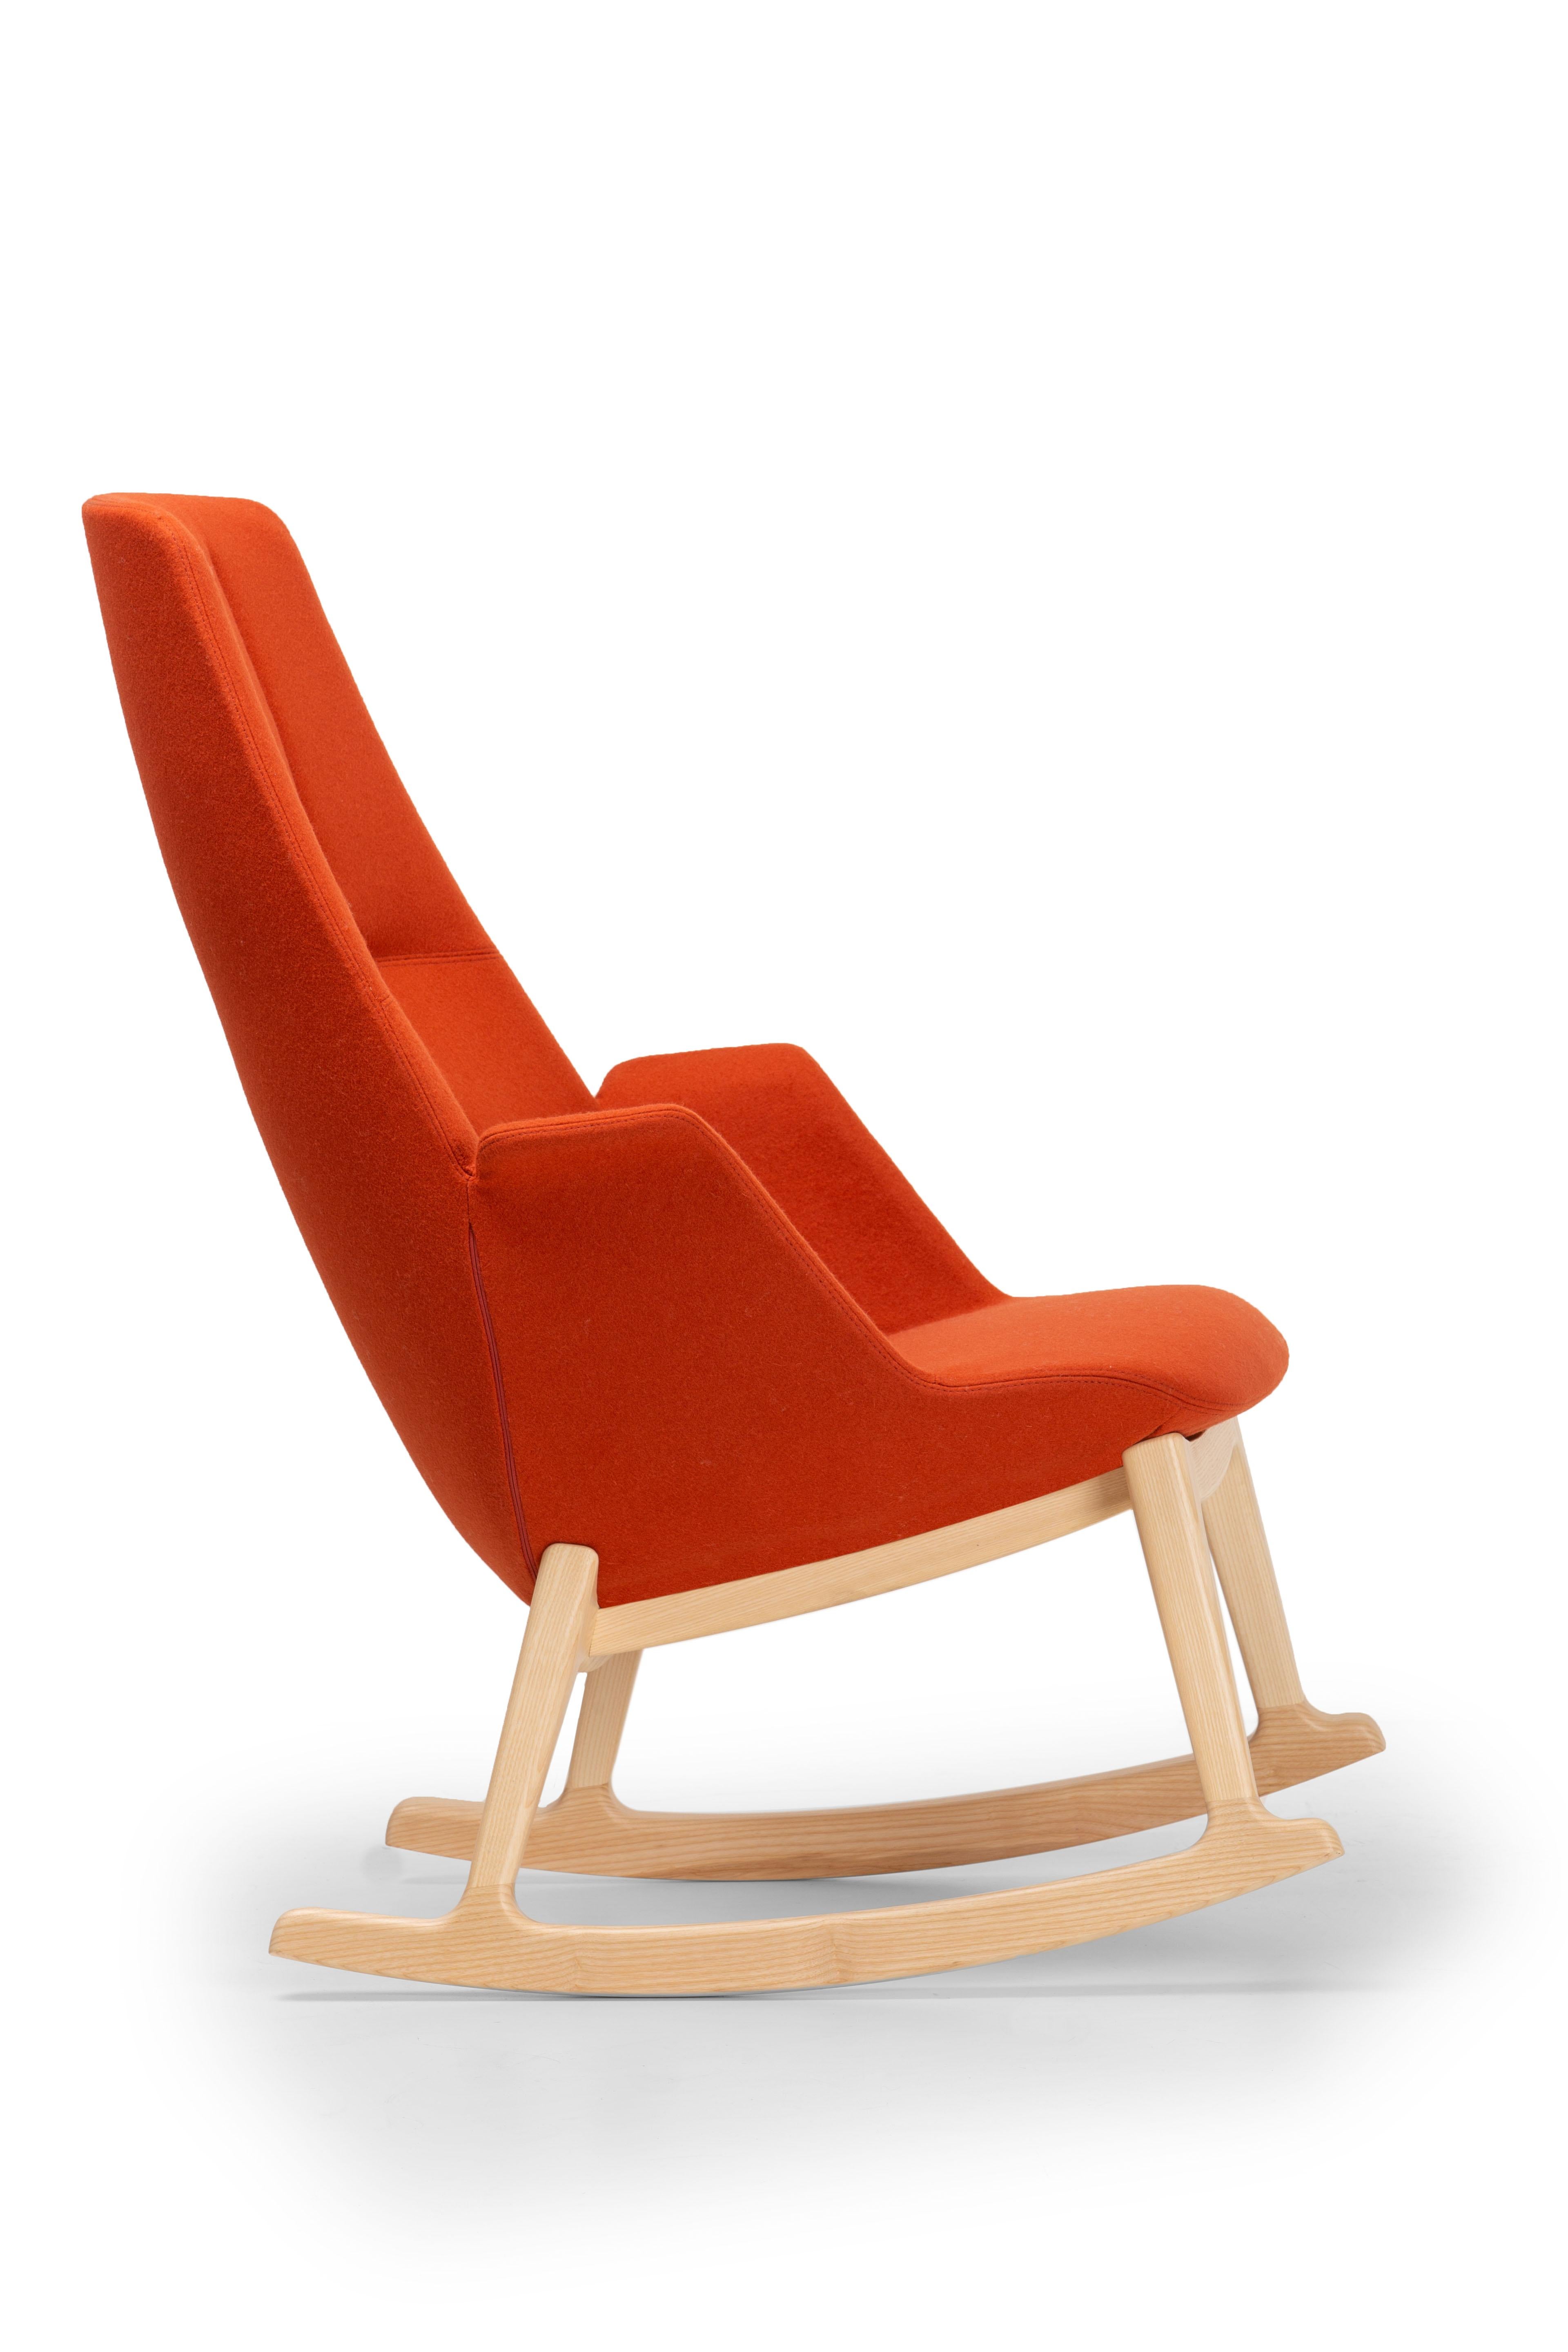 Italian 21st Century Modern Red Wooden Rocking Armchair Hive Made in Italy For Sale